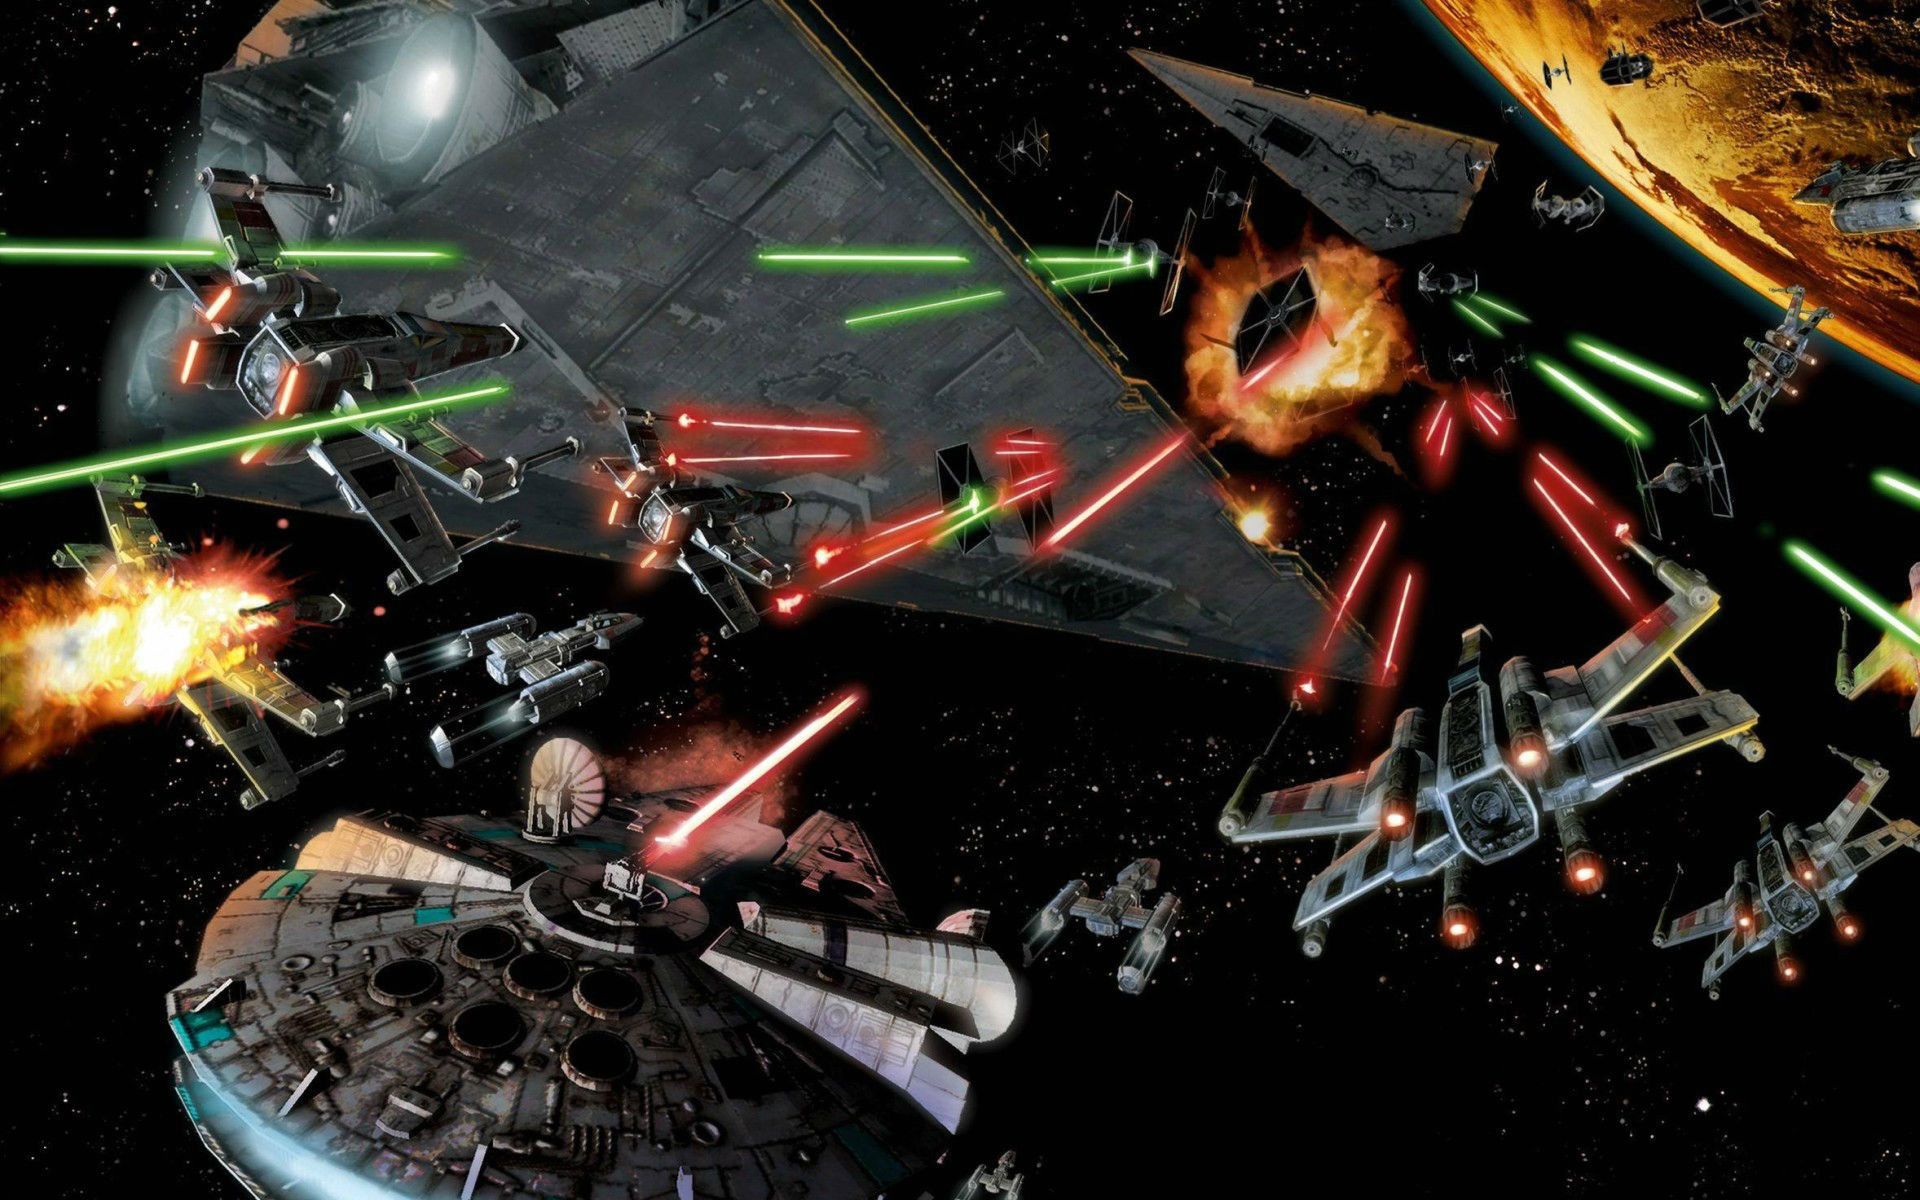 Star Wars Space Fight Background